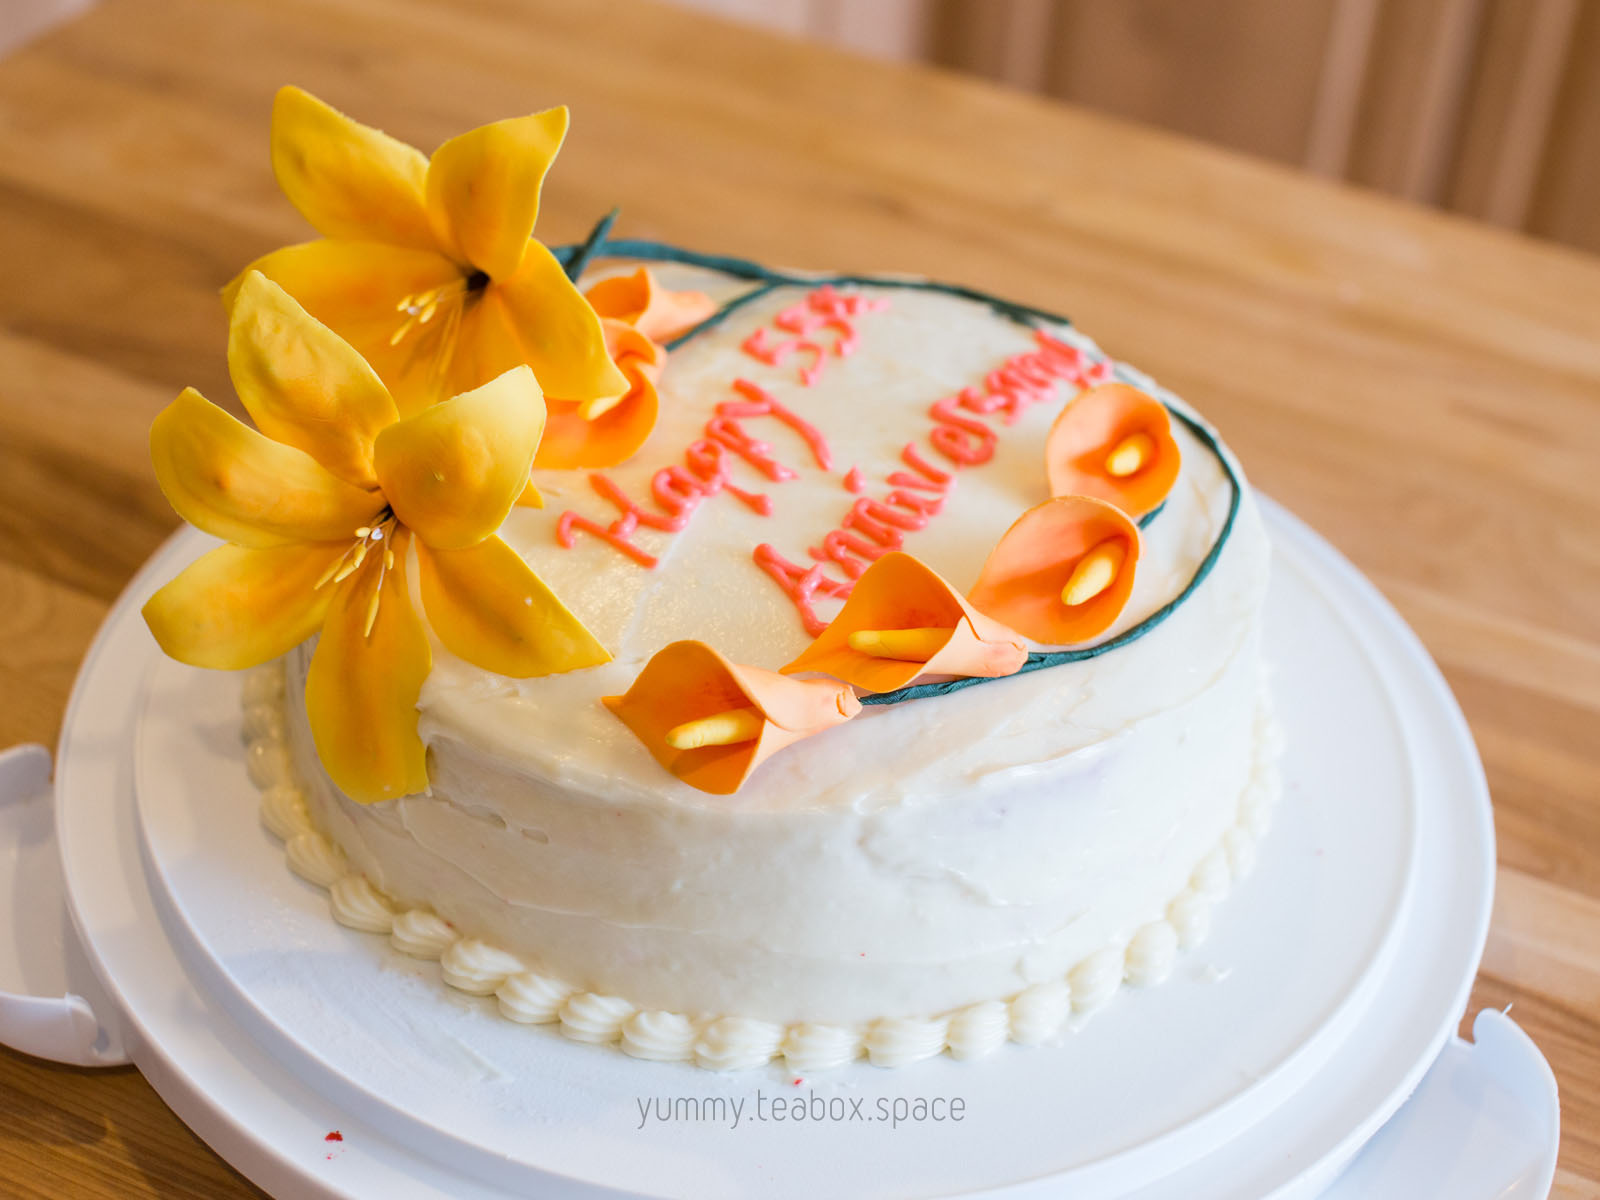 Round cake with white frosting and decorated with yellow lilies and orange calla lilies.